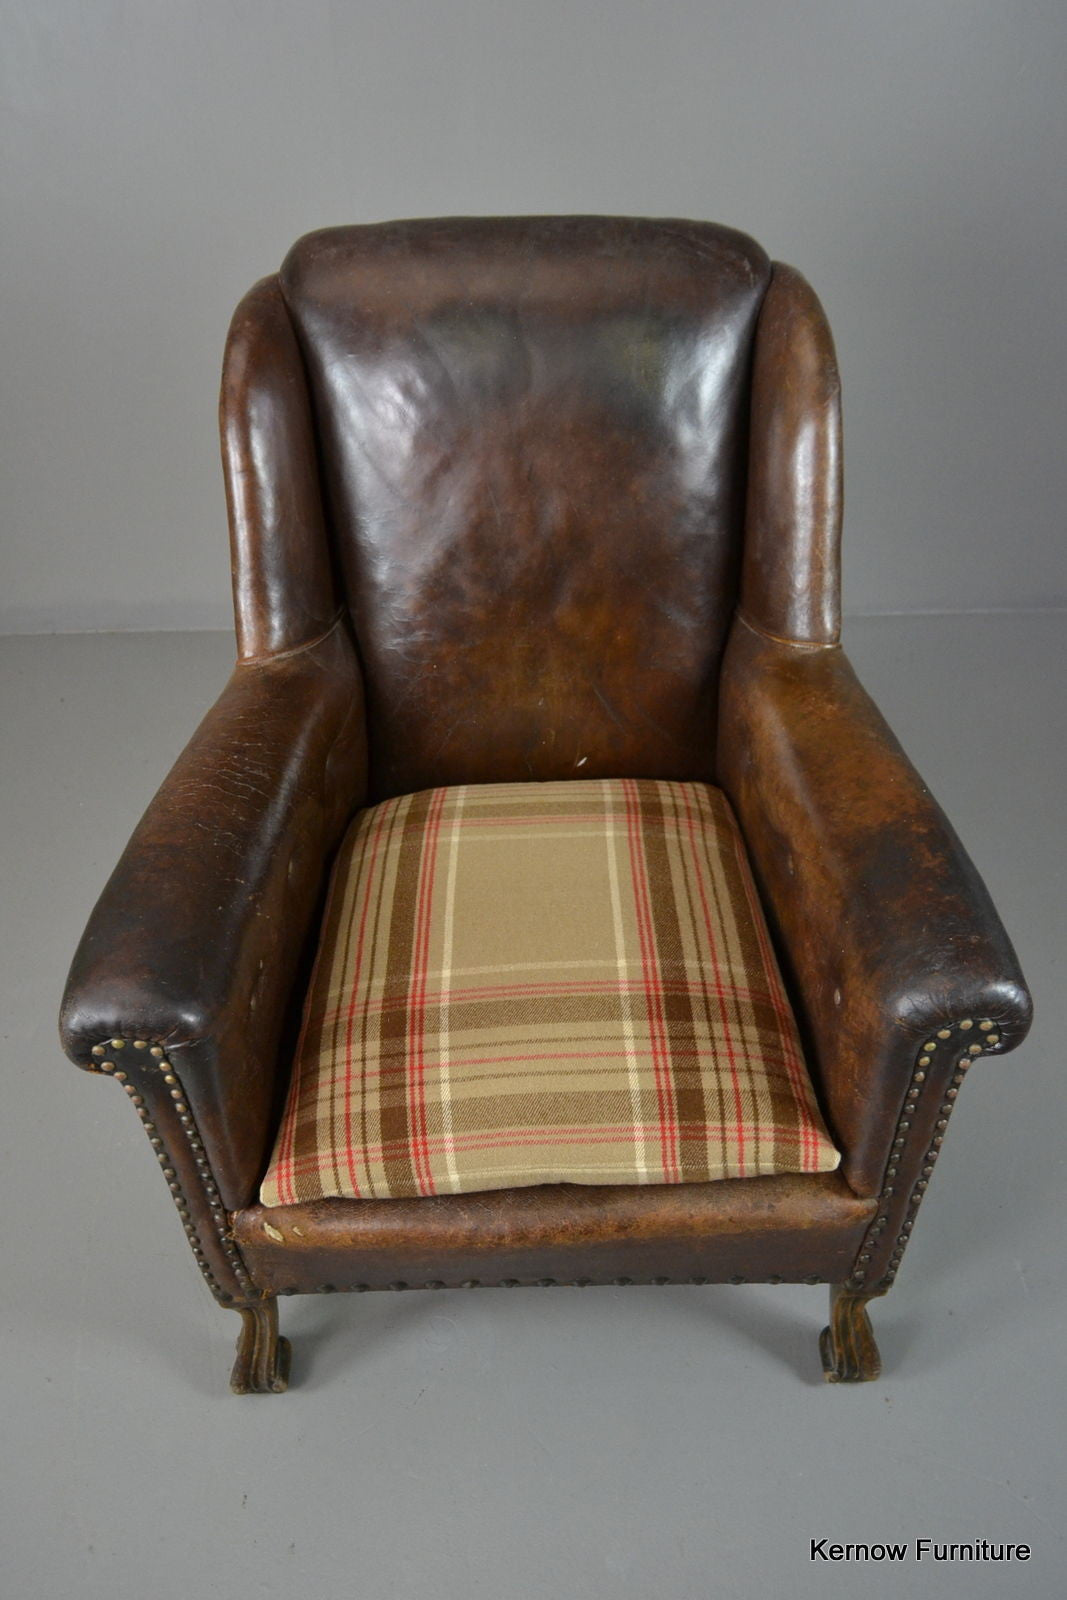 Antique Brown Leather Armchair - Kernow Furniture